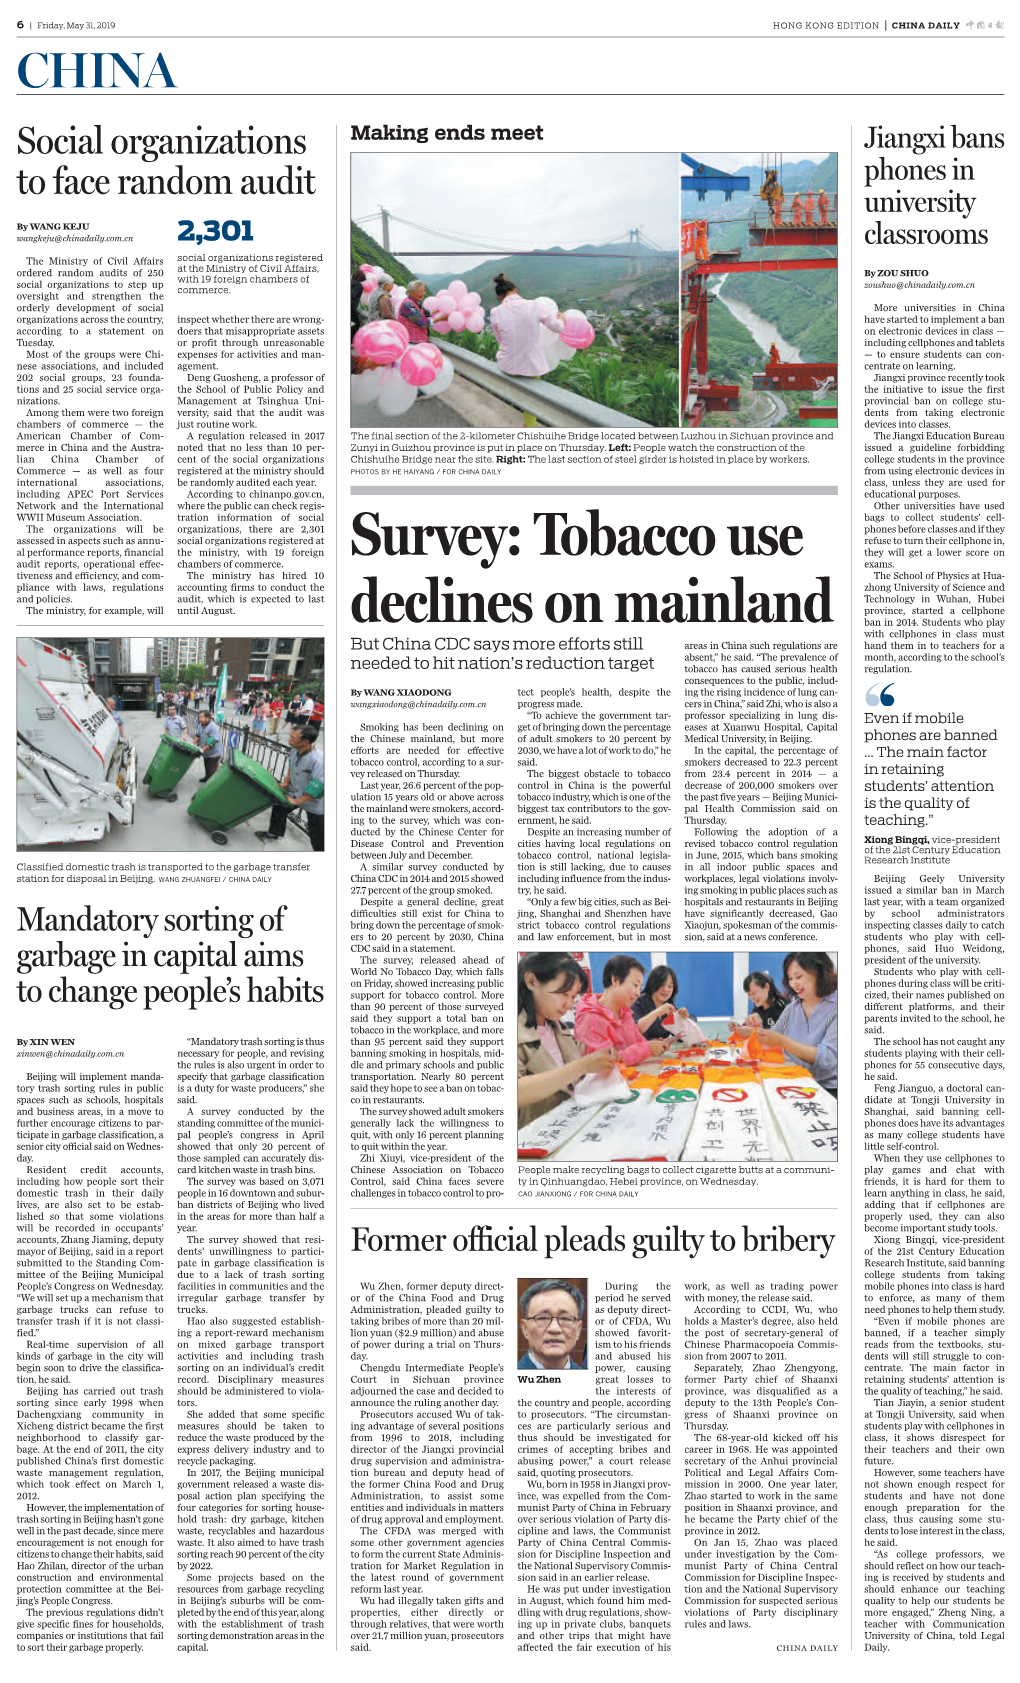 Tobacco Use Declines on Mainland